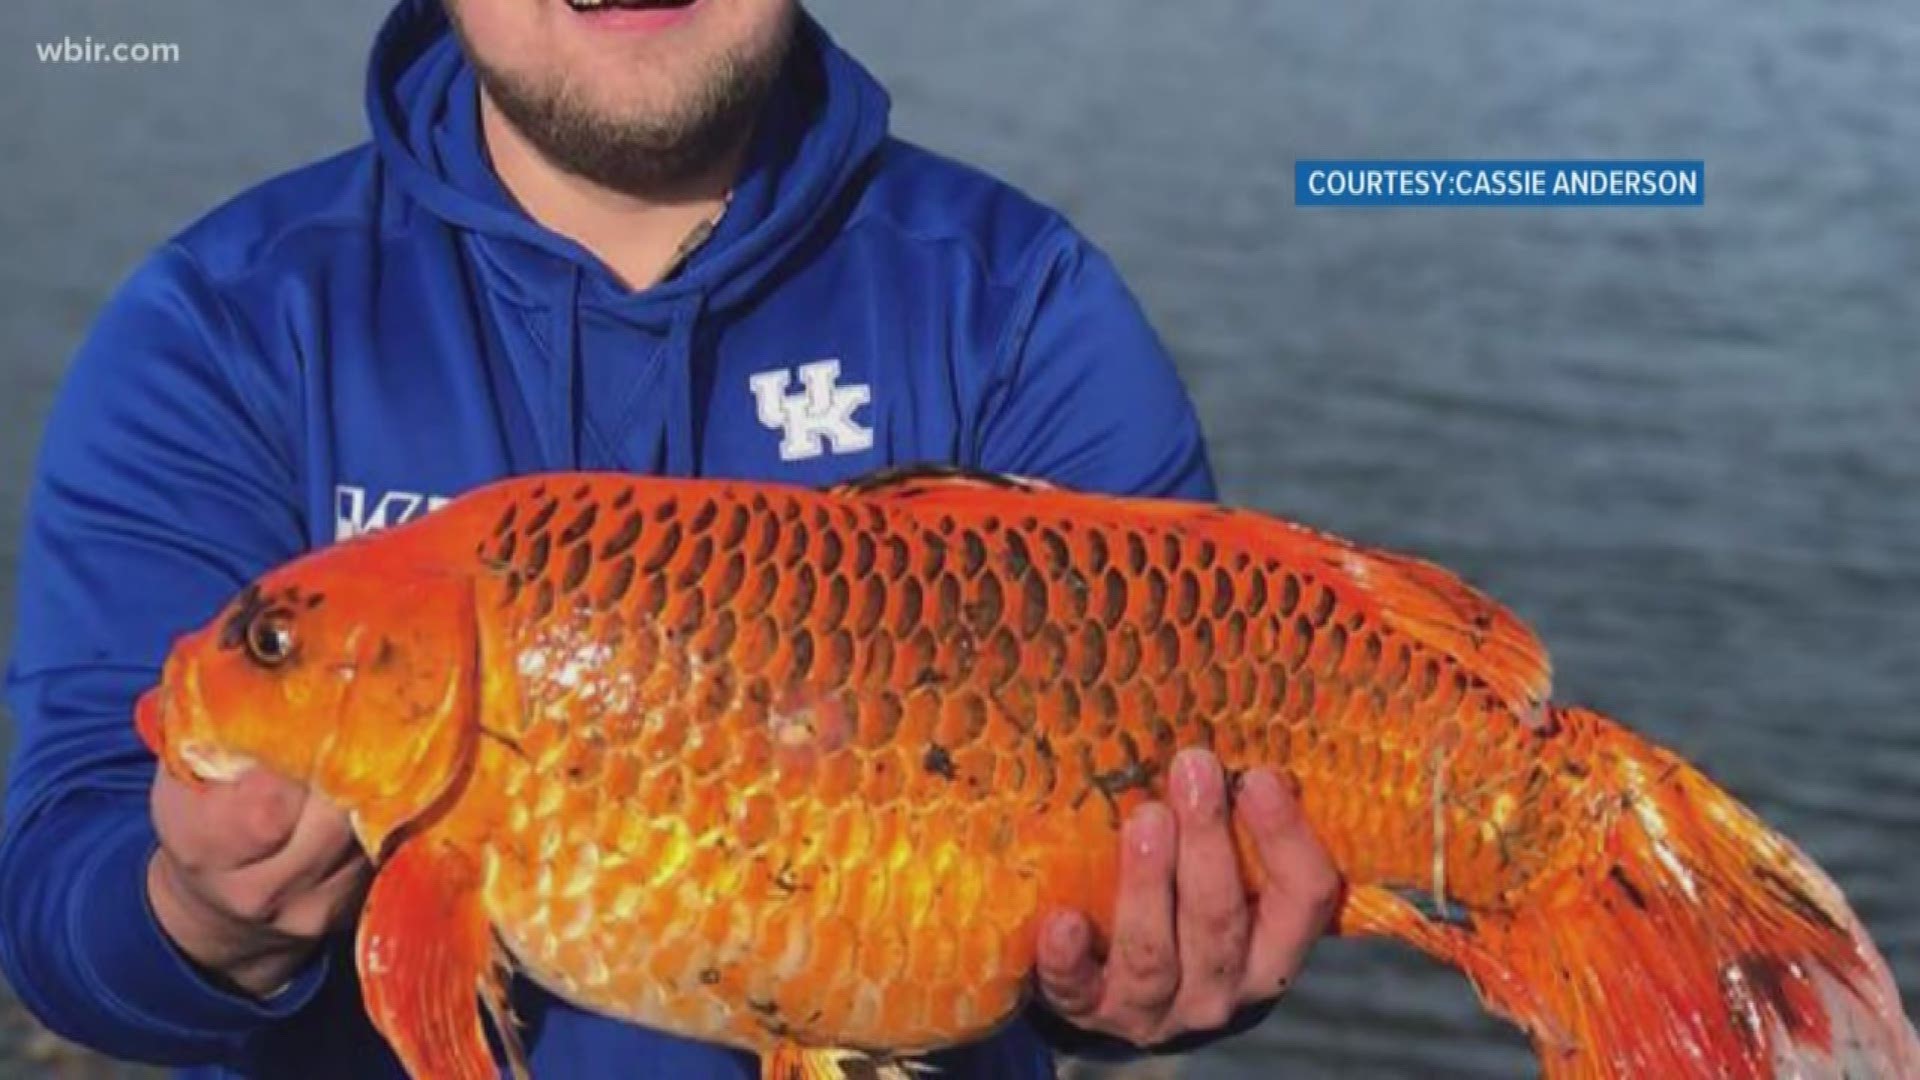 Hunter Anderson caught what he said was a 20-pound goldfish at a private pond in Danville this week. He used a biscuit for bait and released the big guy back into the water.